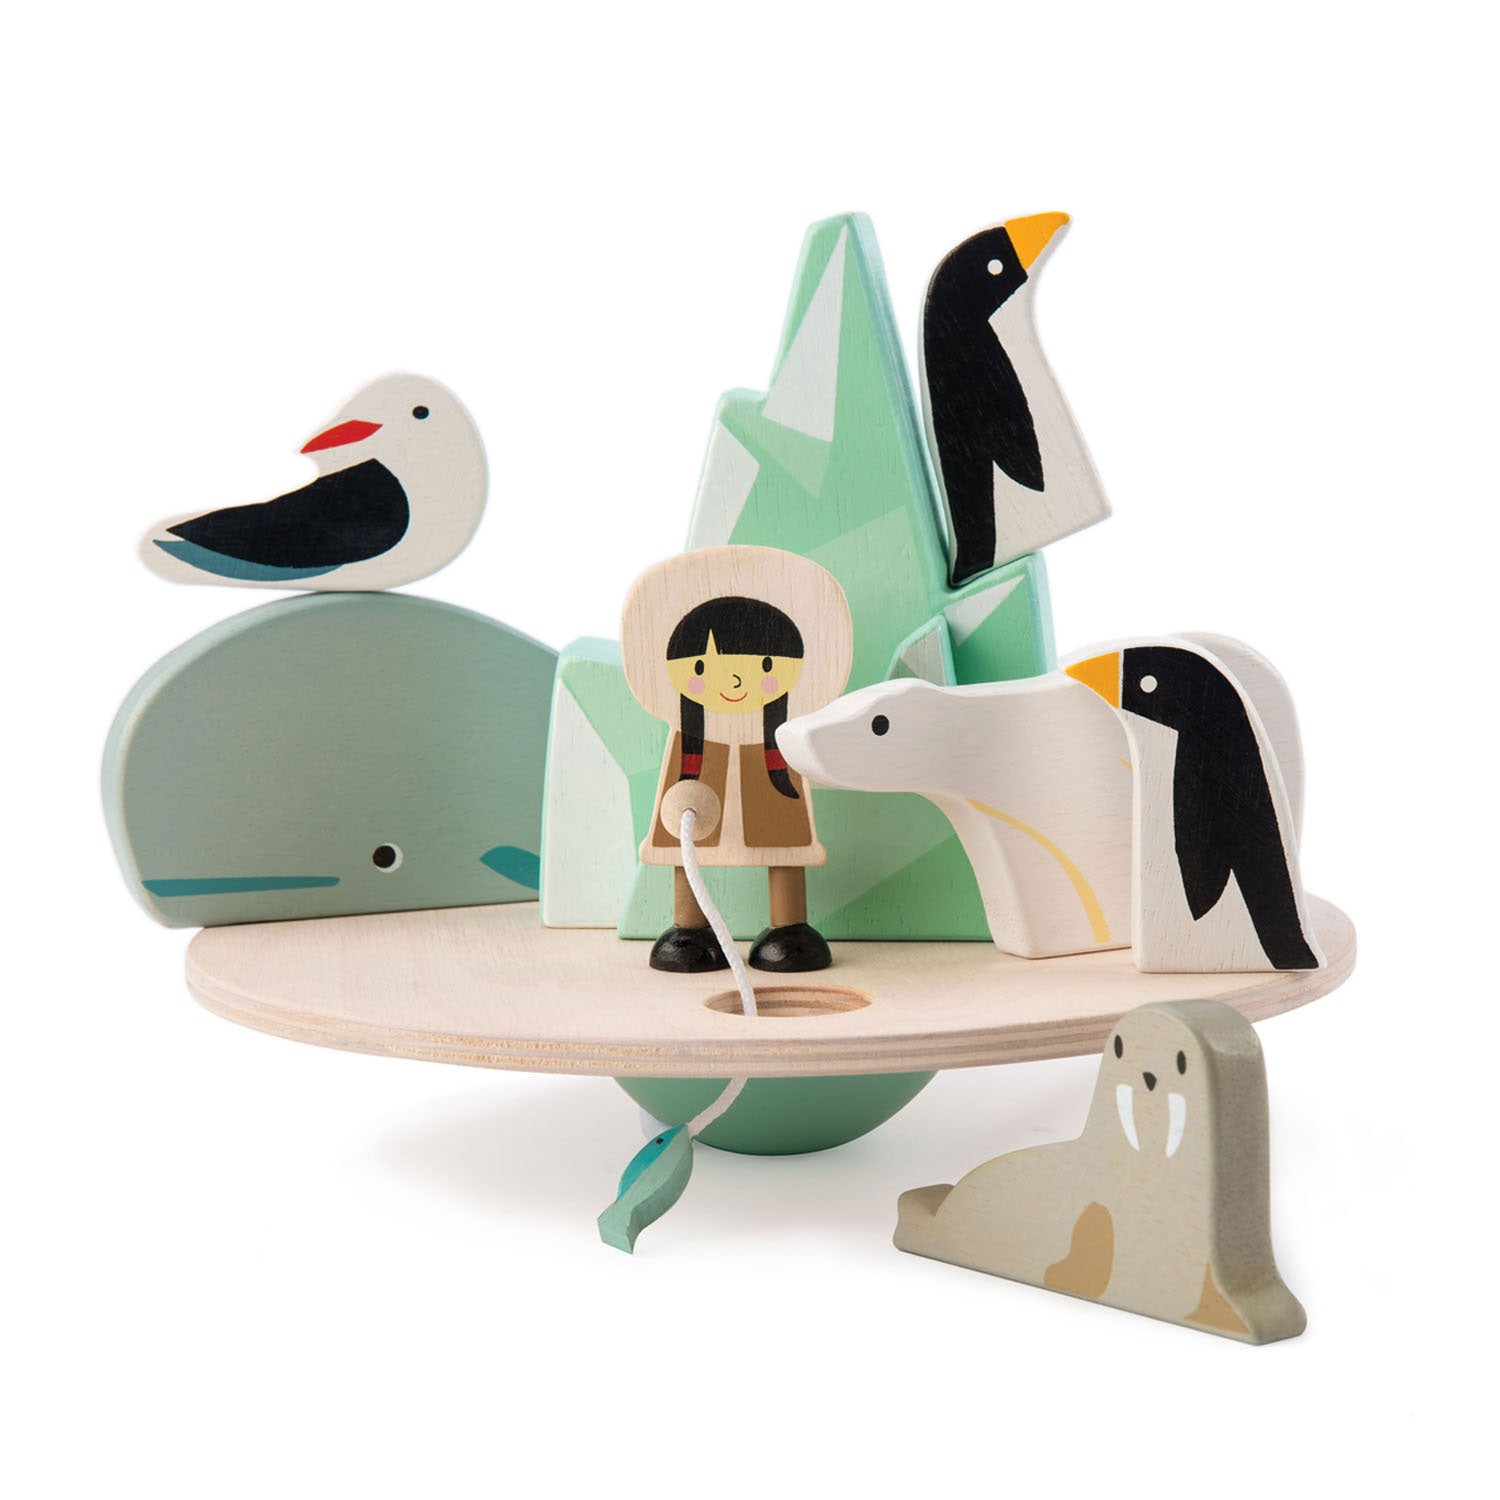 <p>Practice your balancing skills with this beautiful frozen game! </p>
<p>A balancing polar circle, with 2 penguins, a whale, a walrus, a polar bear, a seagull, an iceberg and a little friendly Inuit fishing girl.</p>
<p>Age range: 3 Years And Older  </p>
<p>Product size: 7.87&quot; x 7.87&quot; x 1.57&quot;  </p>
<p>Weight: 0.97 lbs</p>
